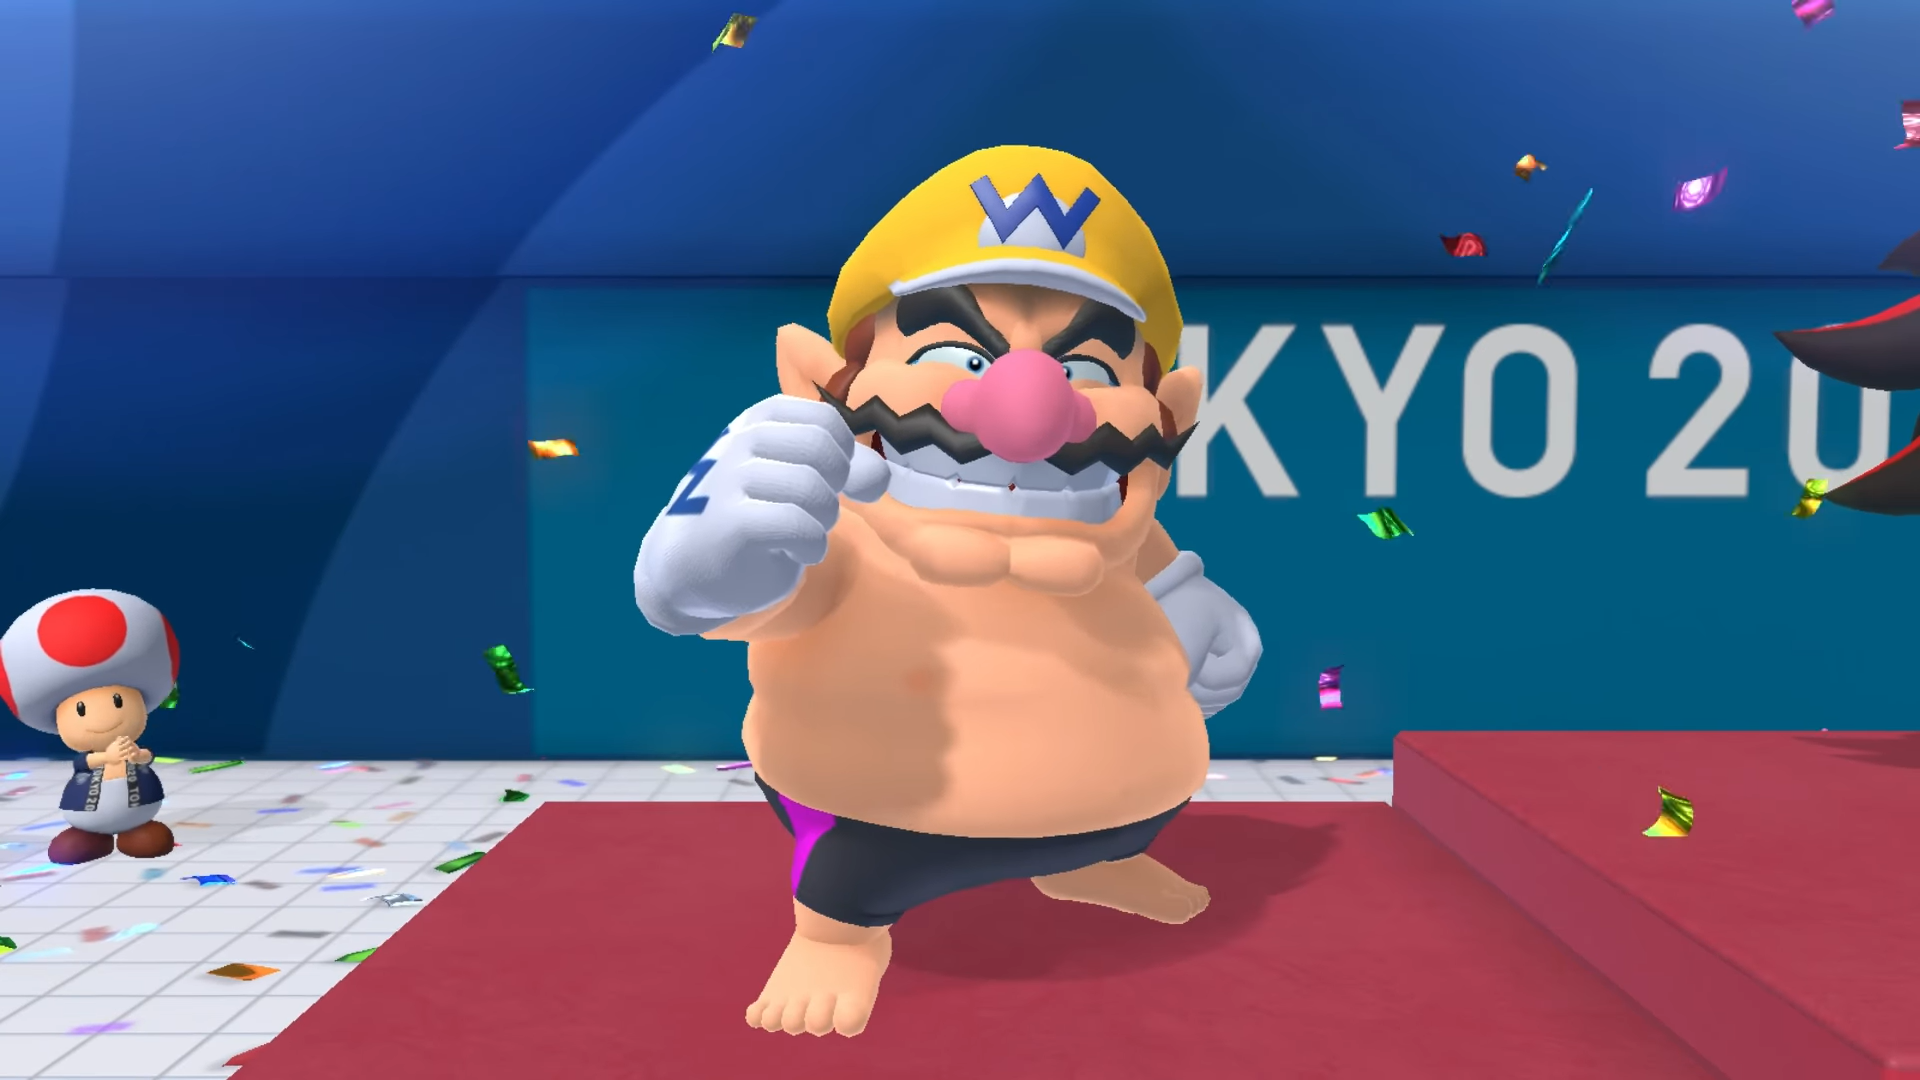 wario celebrating after a big win